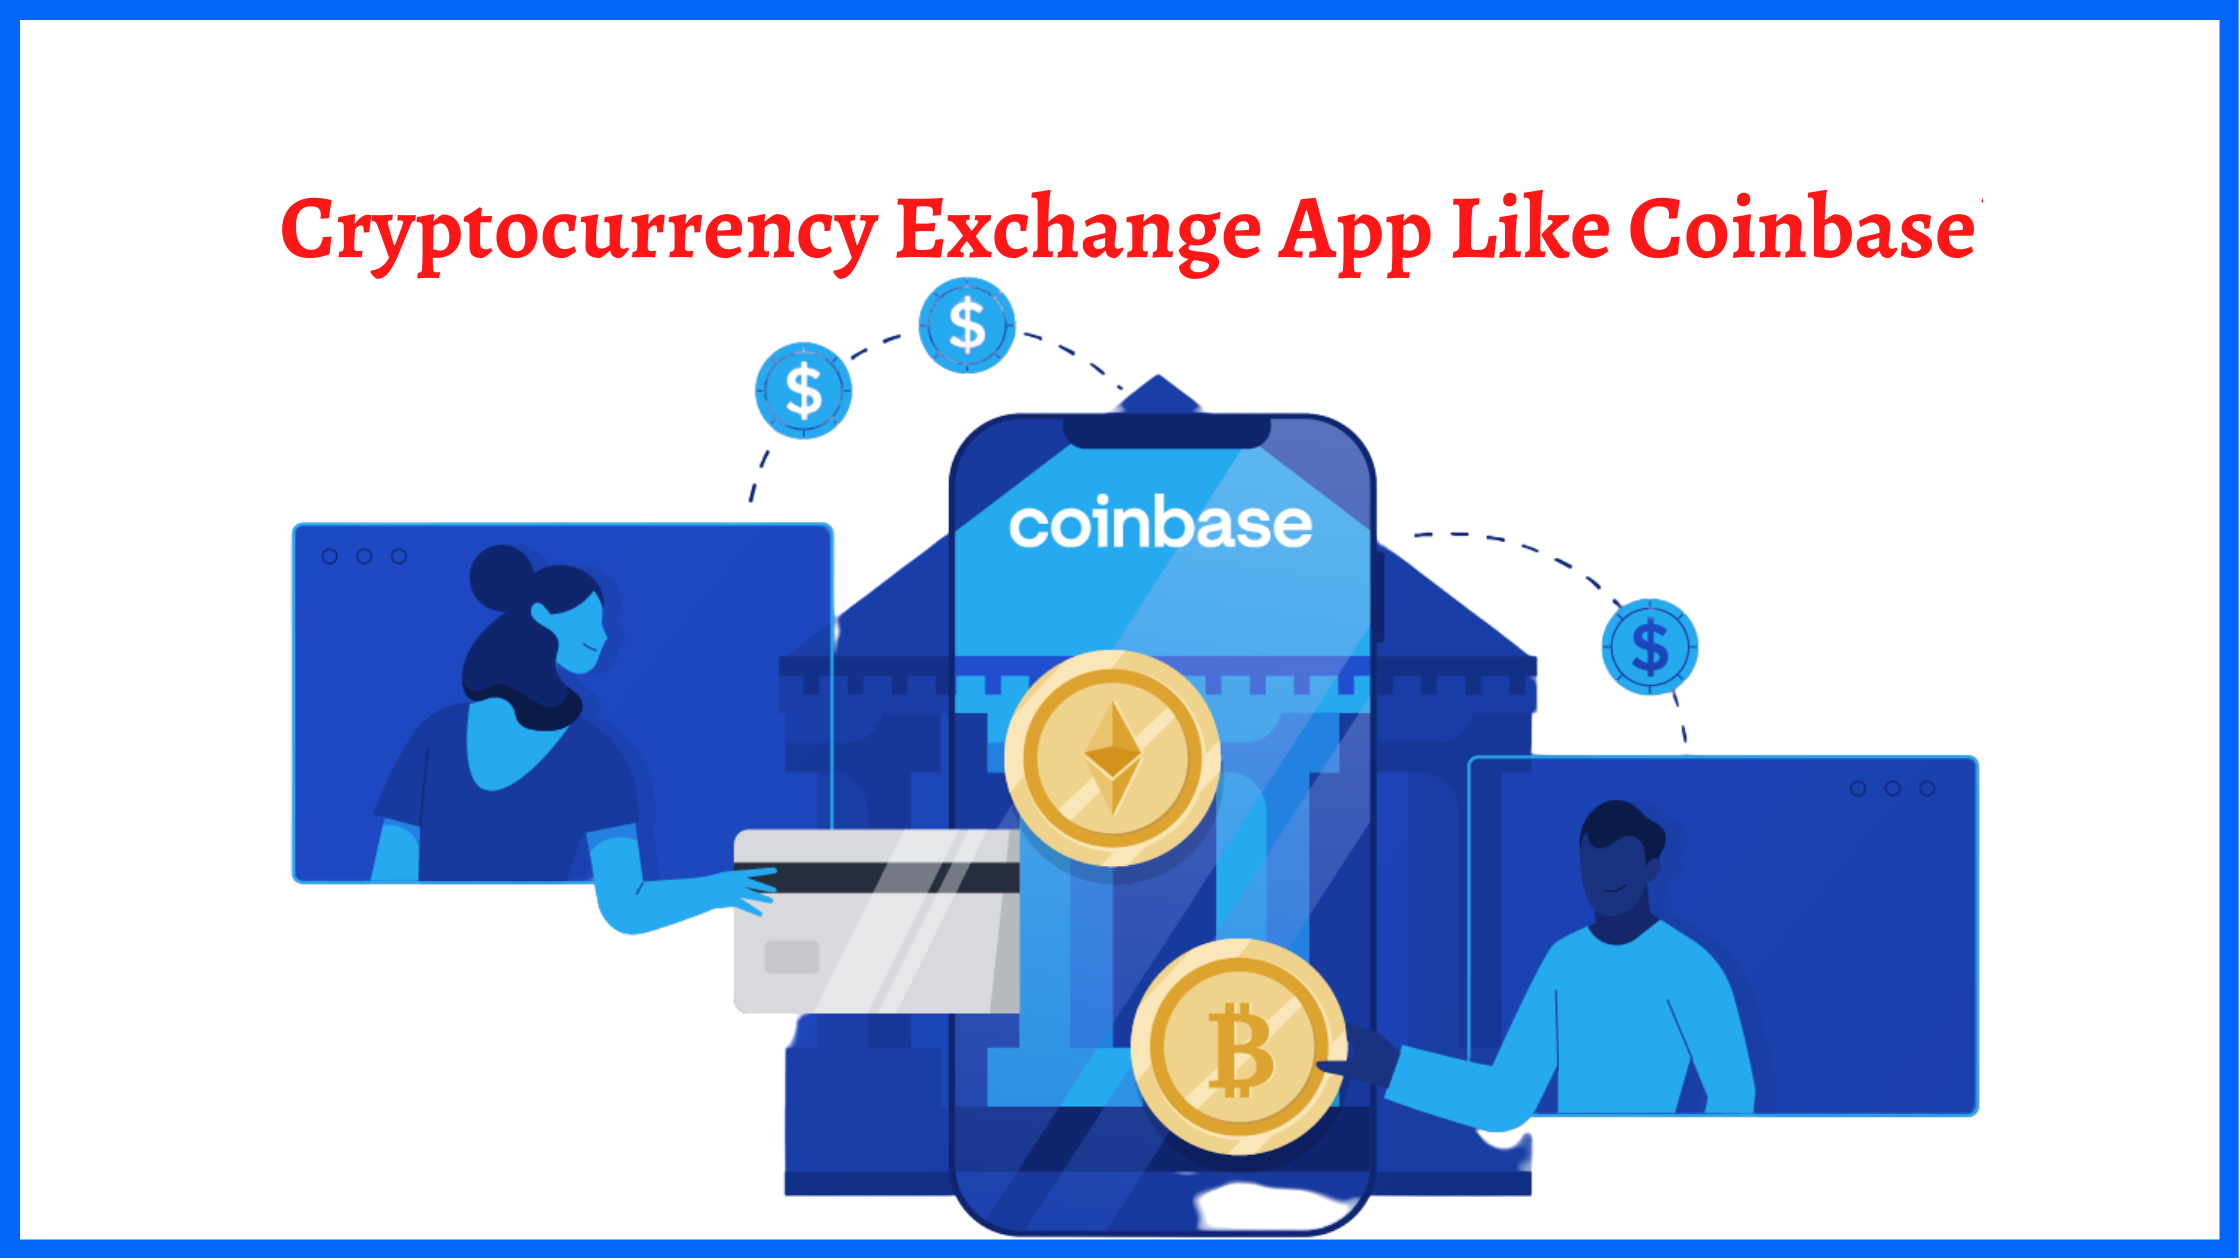 Cost to Build Cryptocurrency Exchange App Like Coinbase